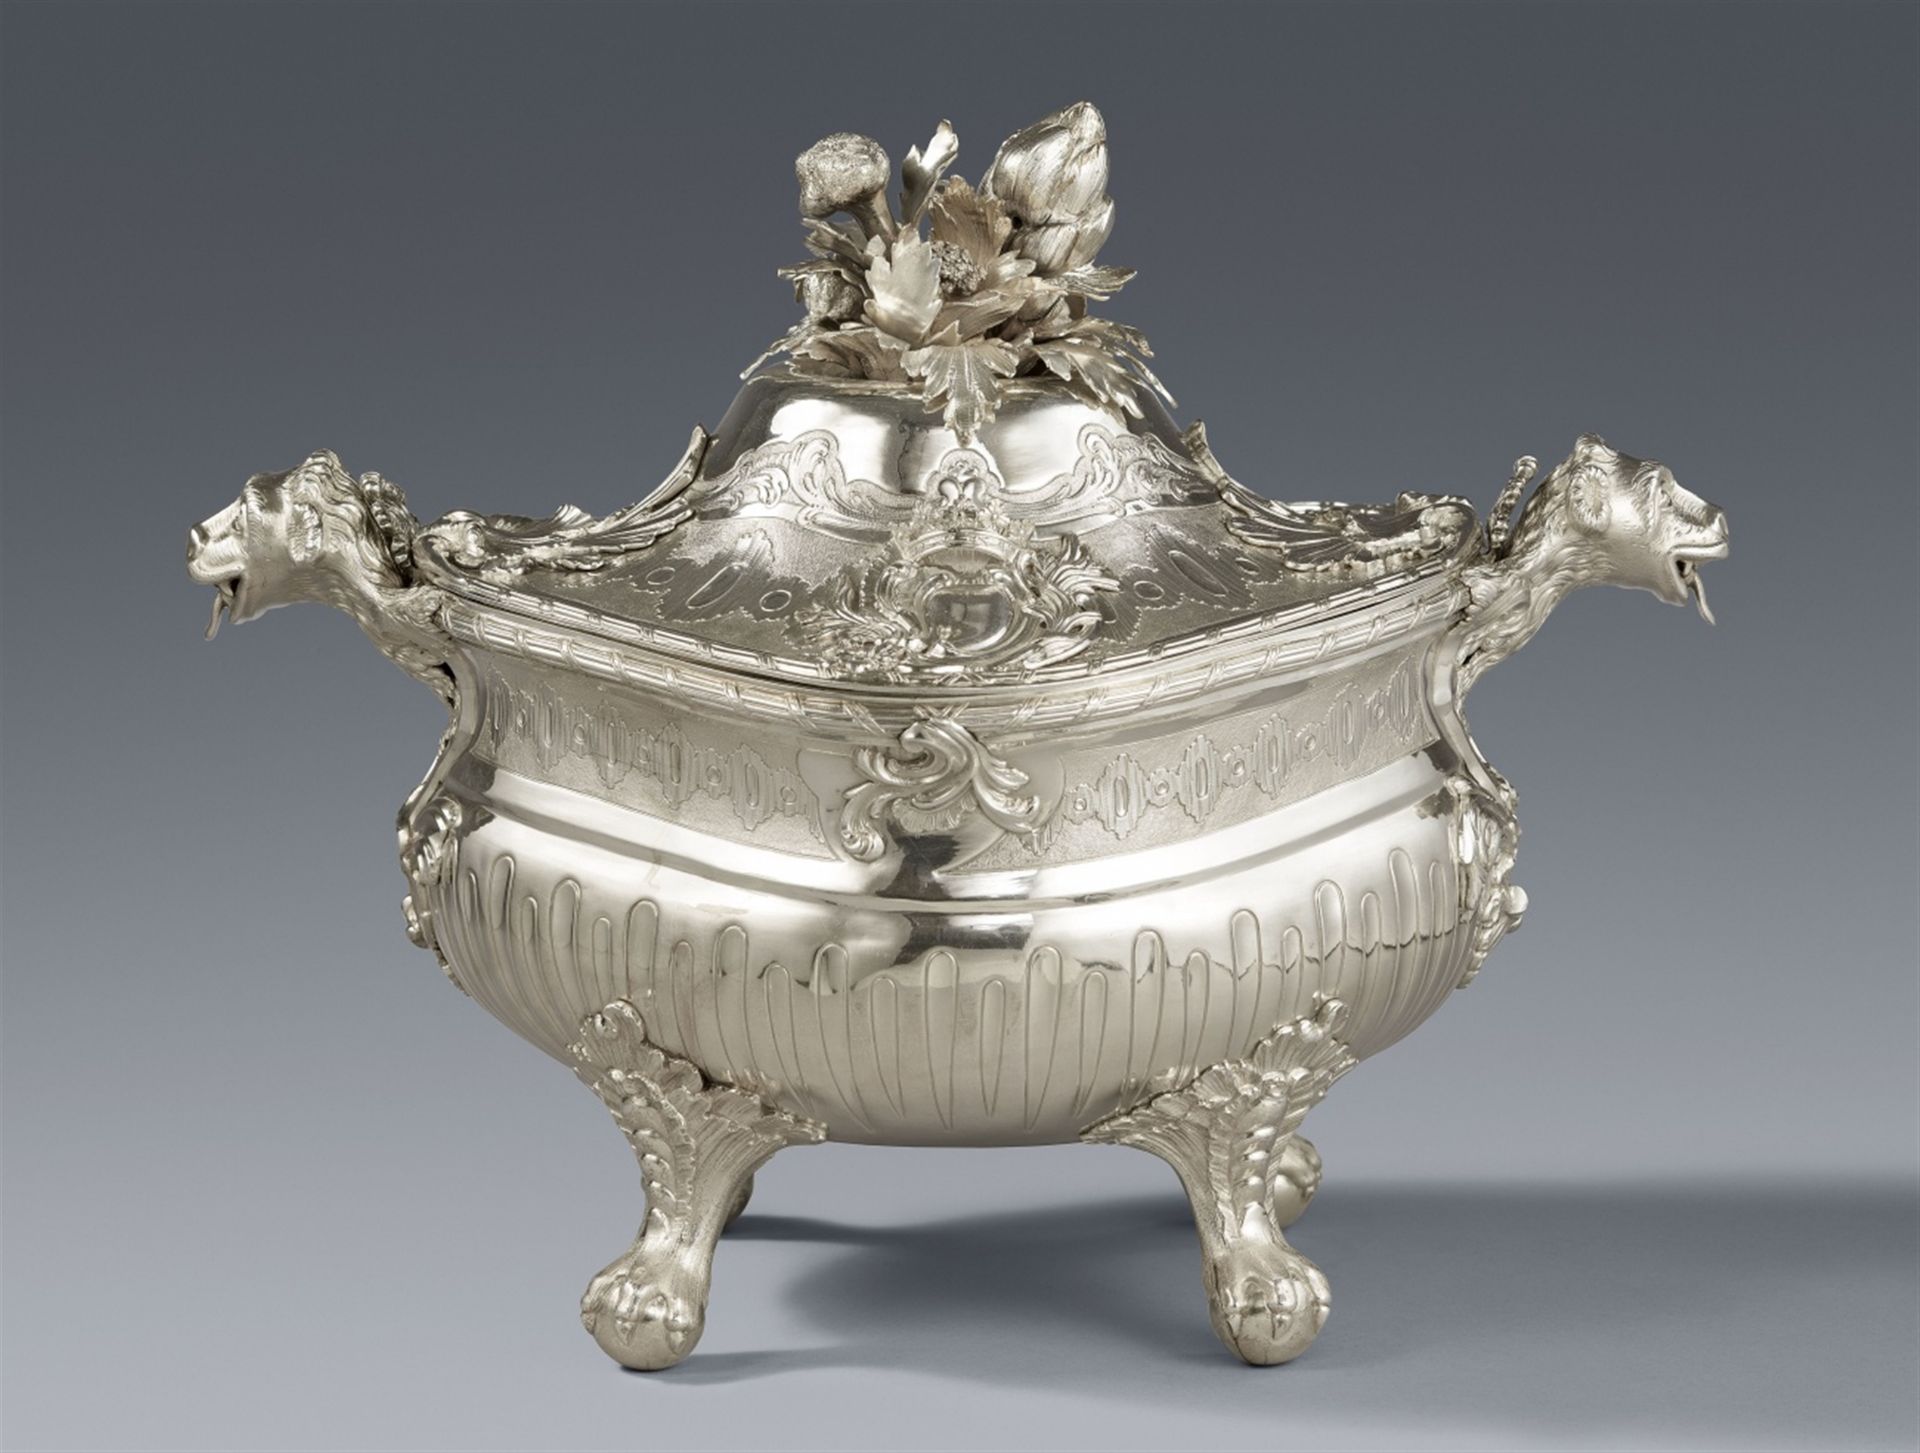 An important Spanish silver tureen and cover